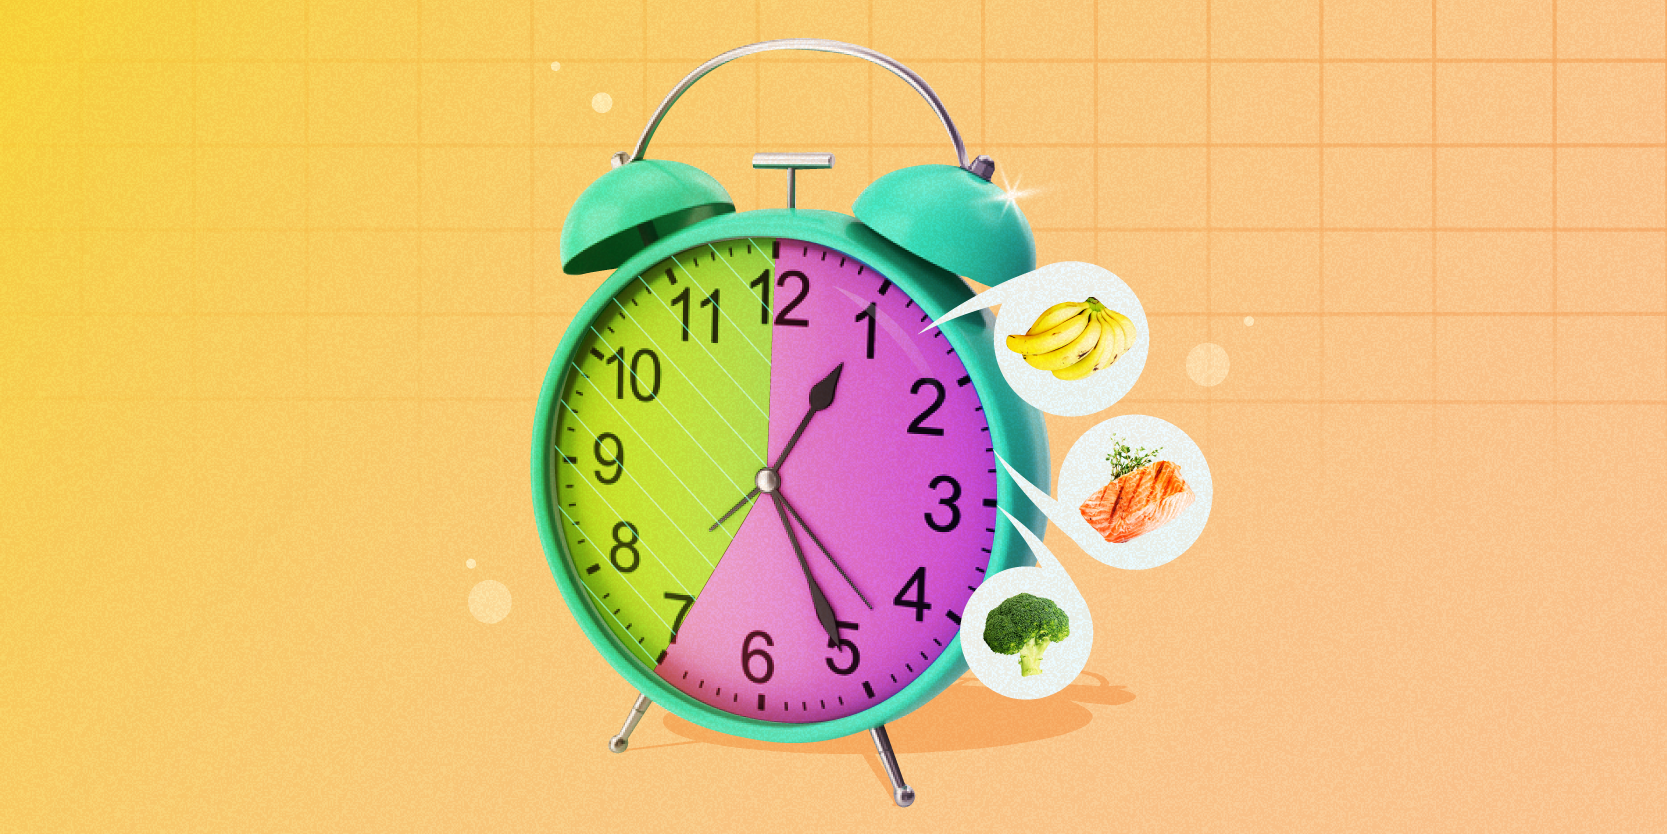 Intermittent fasting schedule clock with fruits, and salmon in callout bubbles